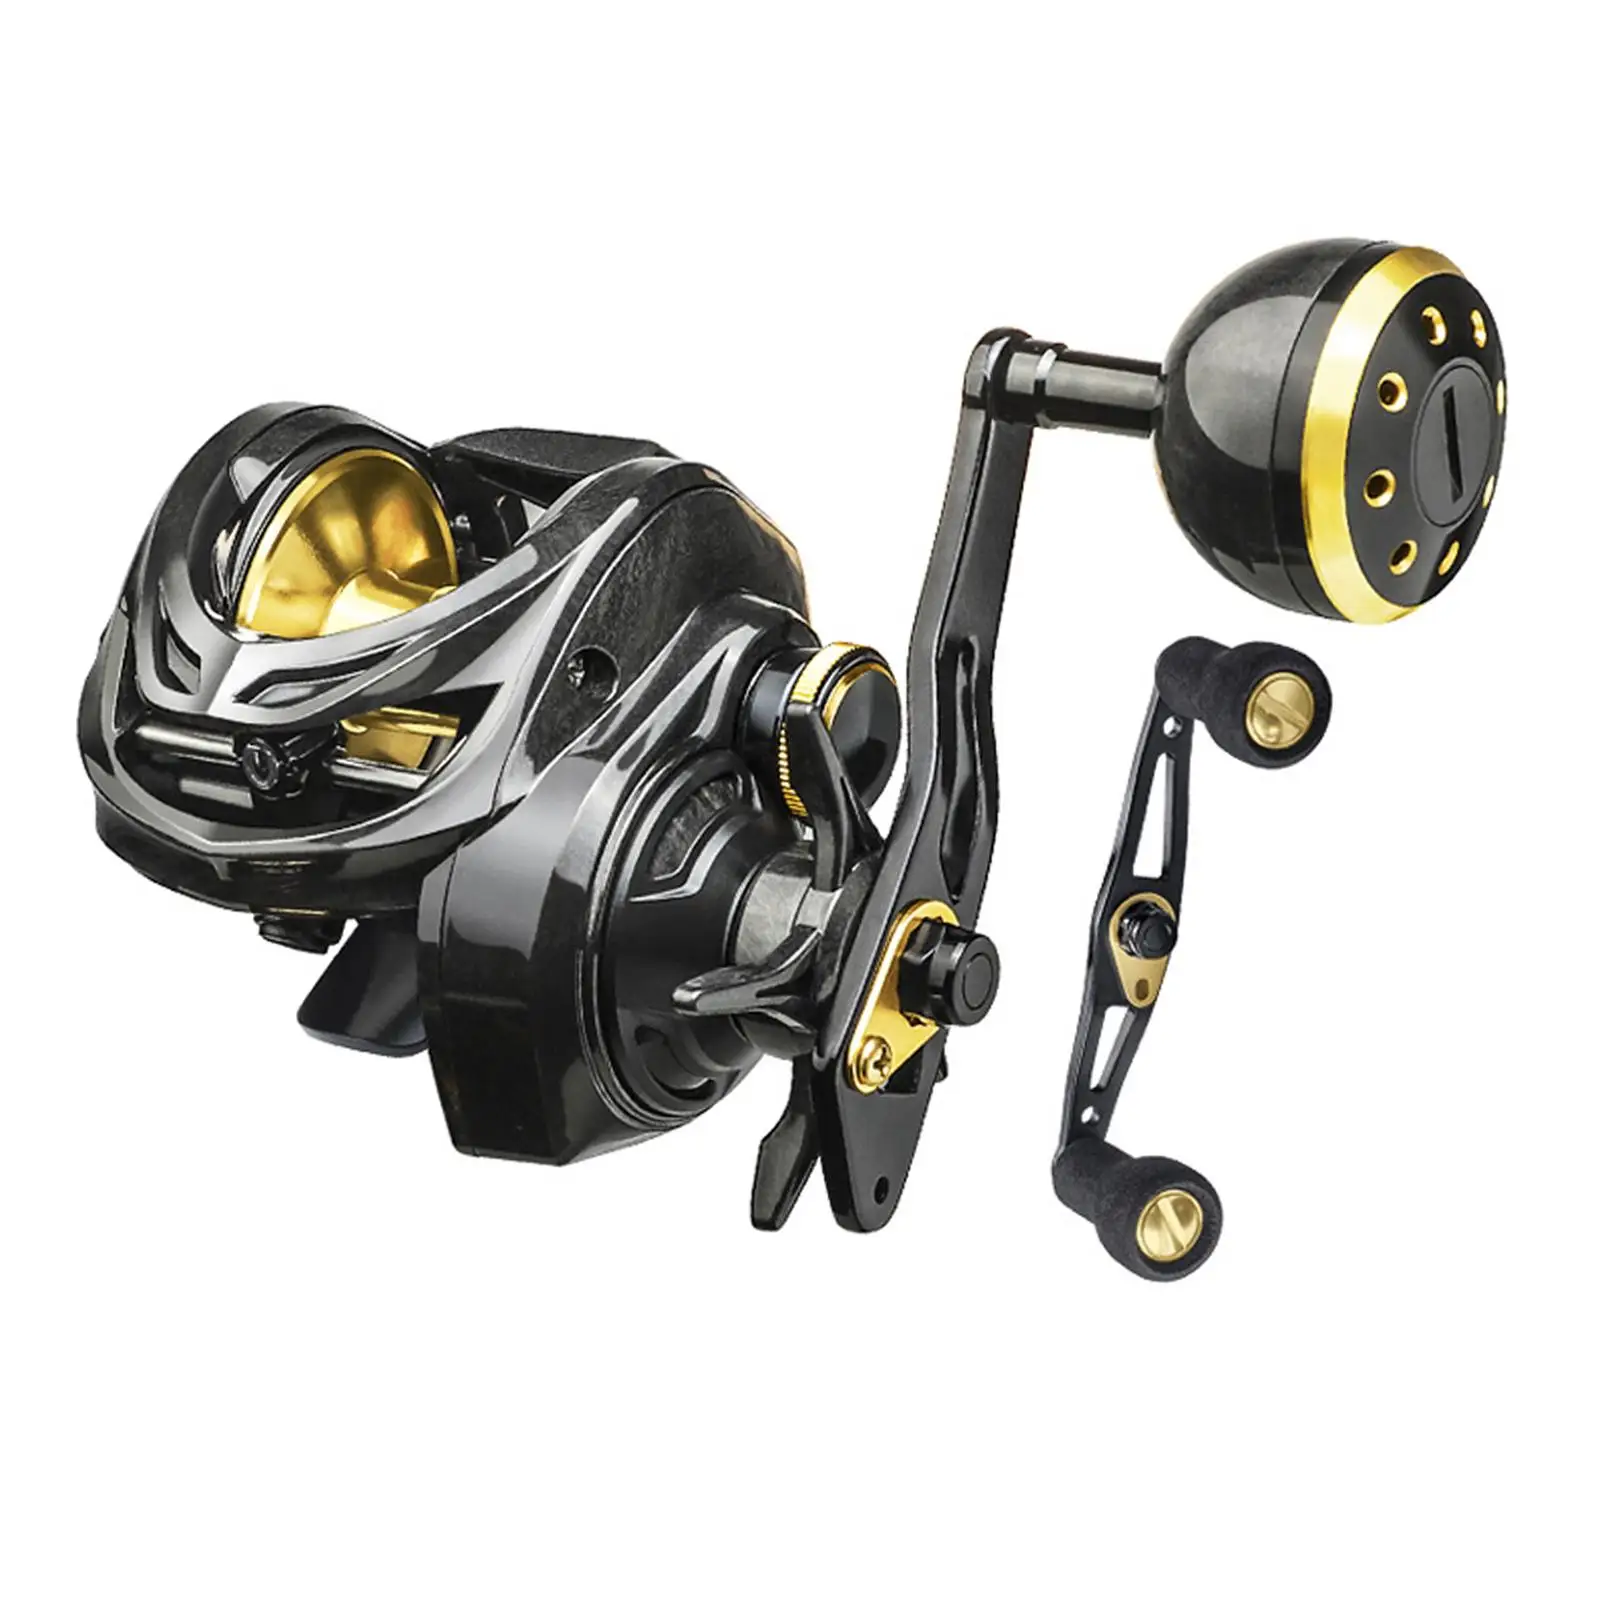 Baitcasting Super Smooth 6+1 Bearings Lightweight Max Drag 16kg Tdc3000 Magnetic Brake 6.3:1 Gear Ratio for Fishing Supplies